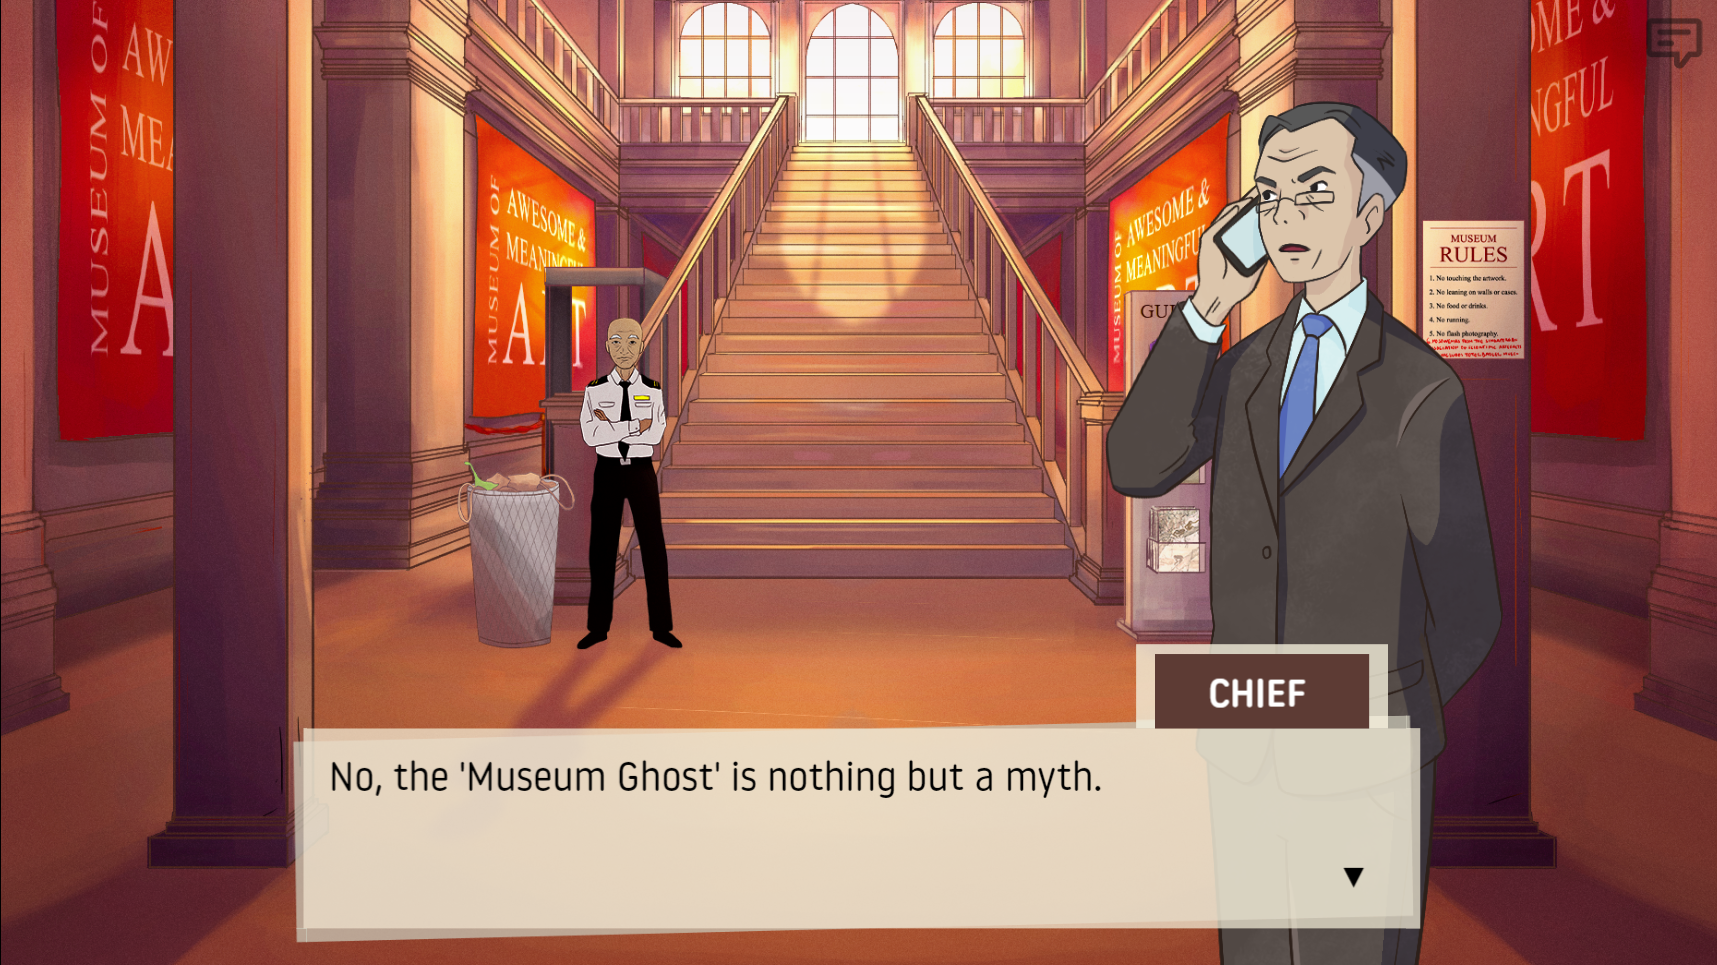 A museum chief standing at the foot of a grand museum staircase, talking into a phone, saying "No, the Museum Ghost is nothing but a myth." 